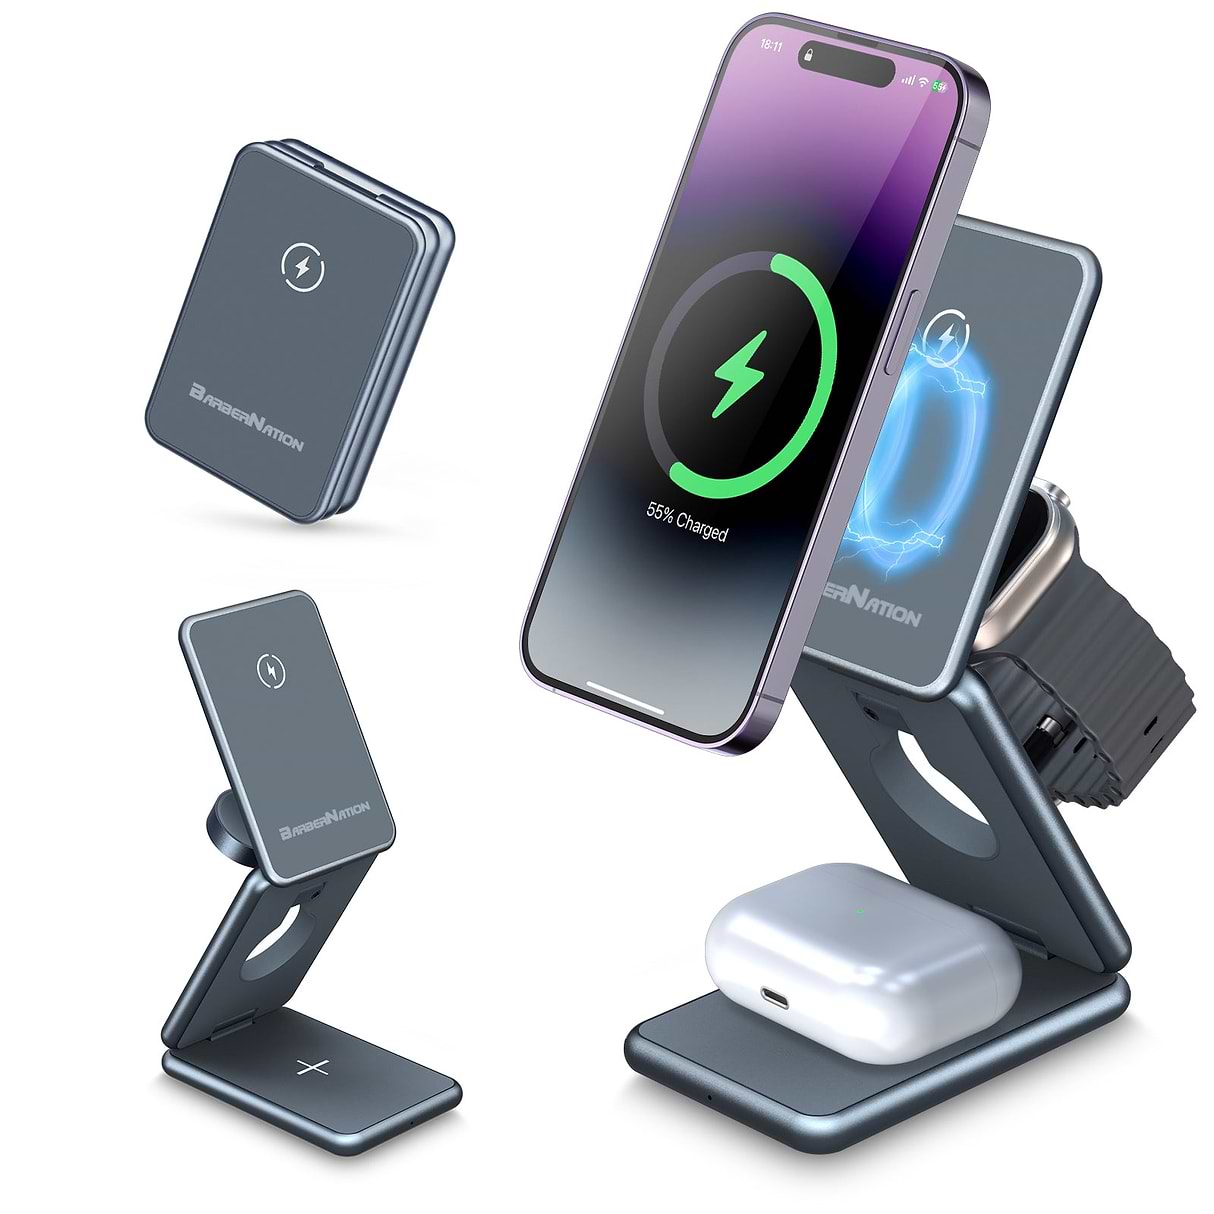 BarberNation 3-in-1 Aluminum Alloy Magnetic Wireless Charger for iPhone, iPods and Apple Watch